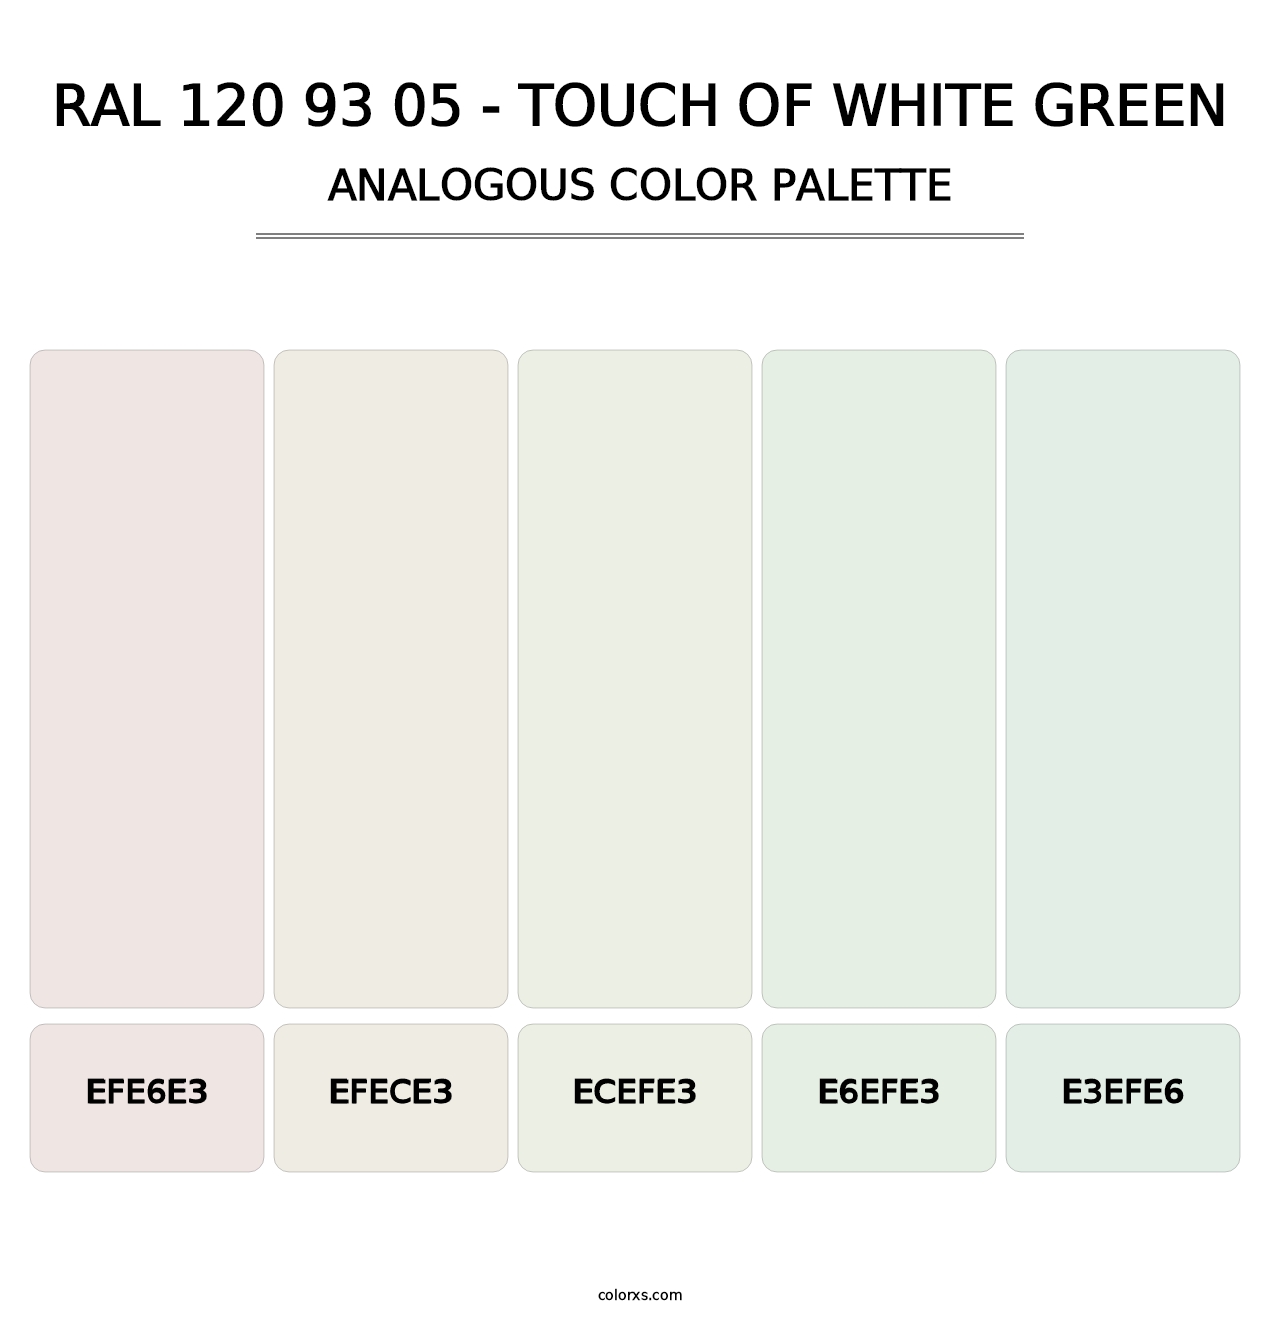 RAL 120 93 05 - Touch Of White Green - Analogous Color Palette